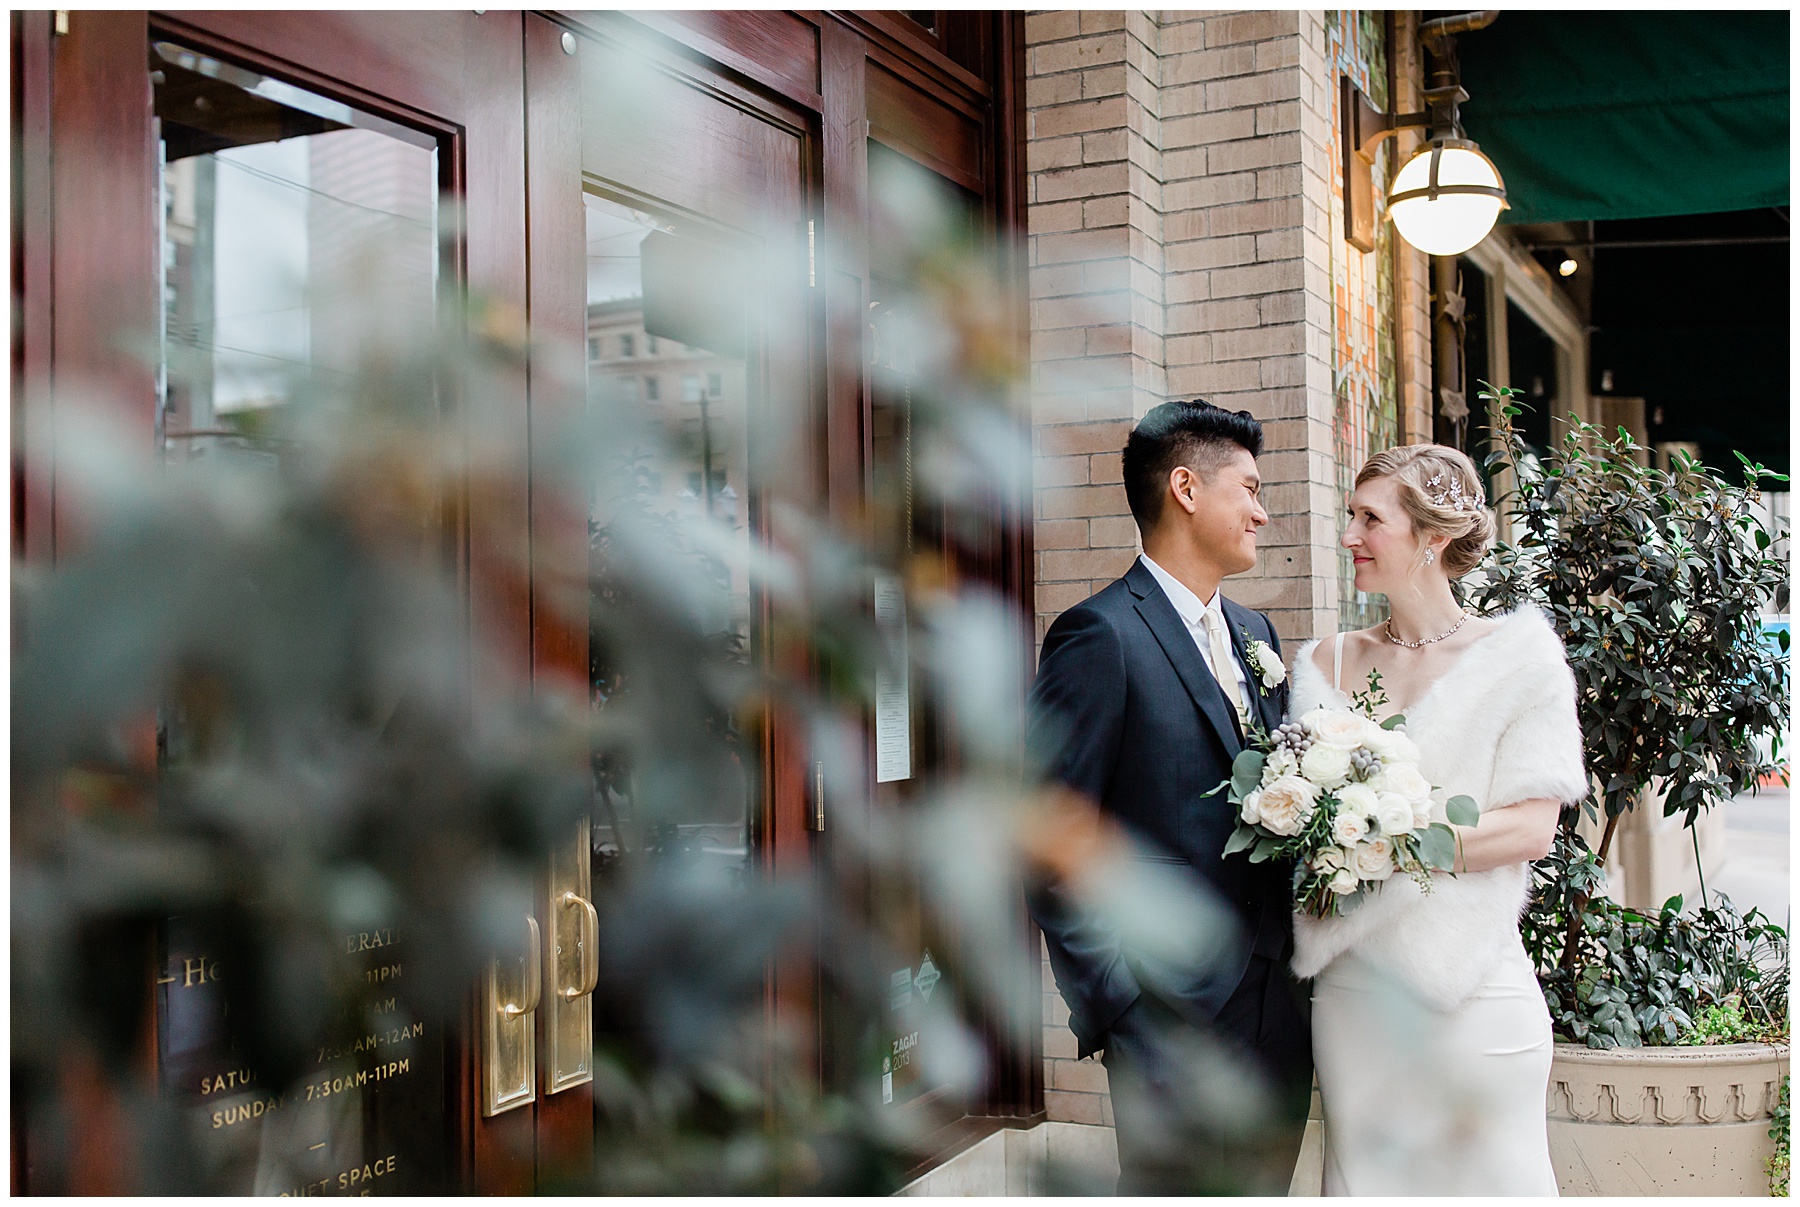 romantic wedding portraits outside the Sentinel hotel in downtown portland oregon. the couple is wearing vintage silk attire.